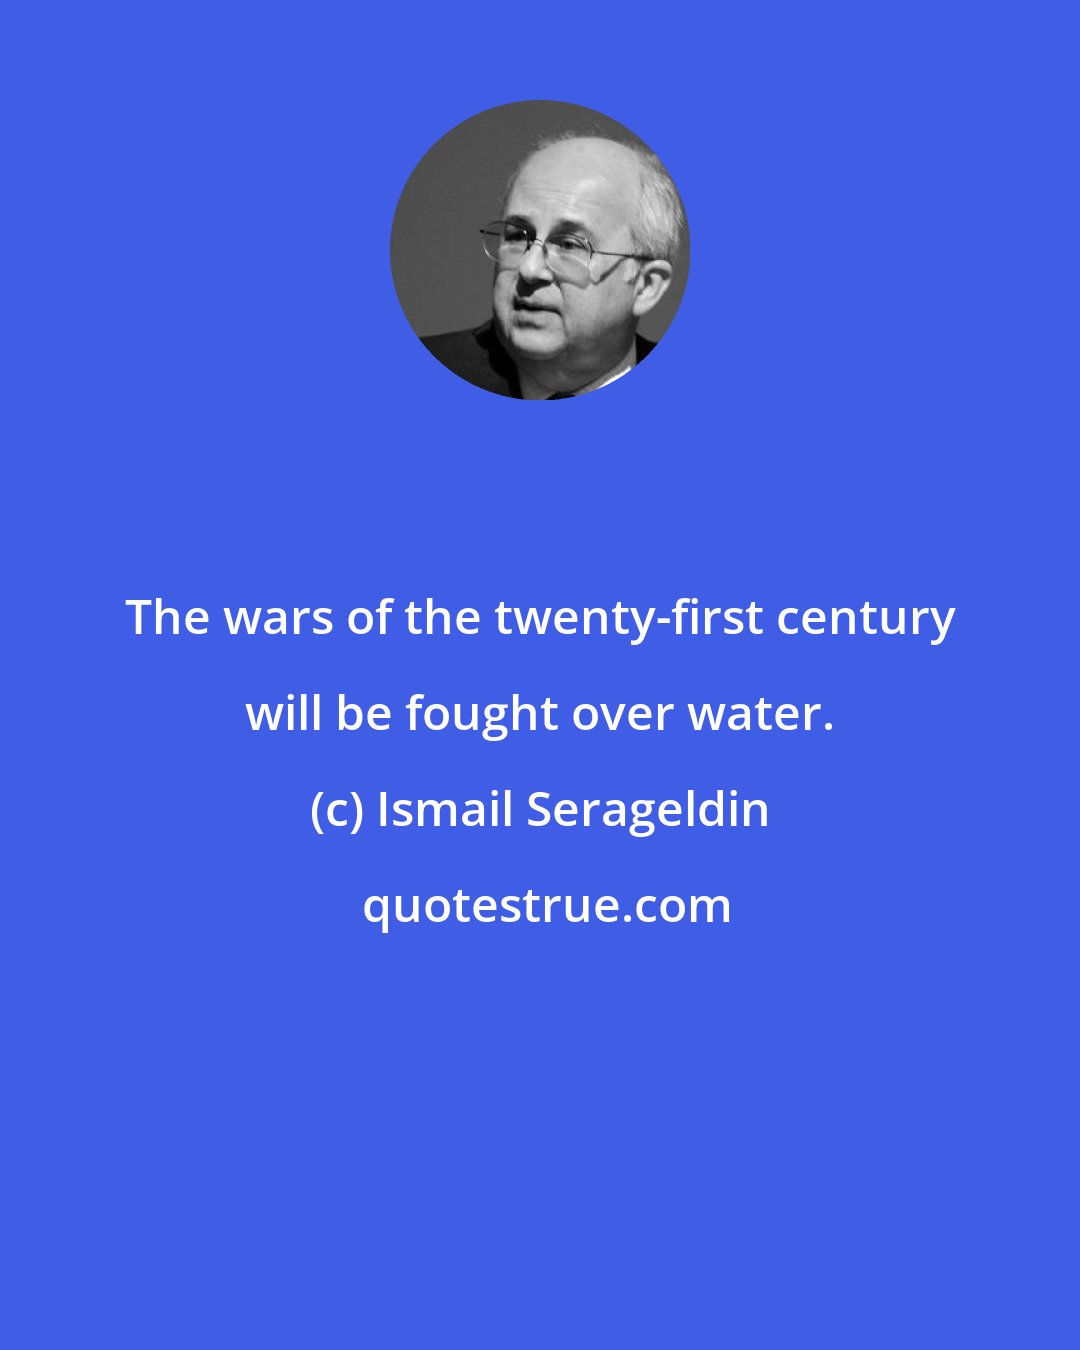 Ismail Serageldin: The wars of the twenty-first century will be fought over water.